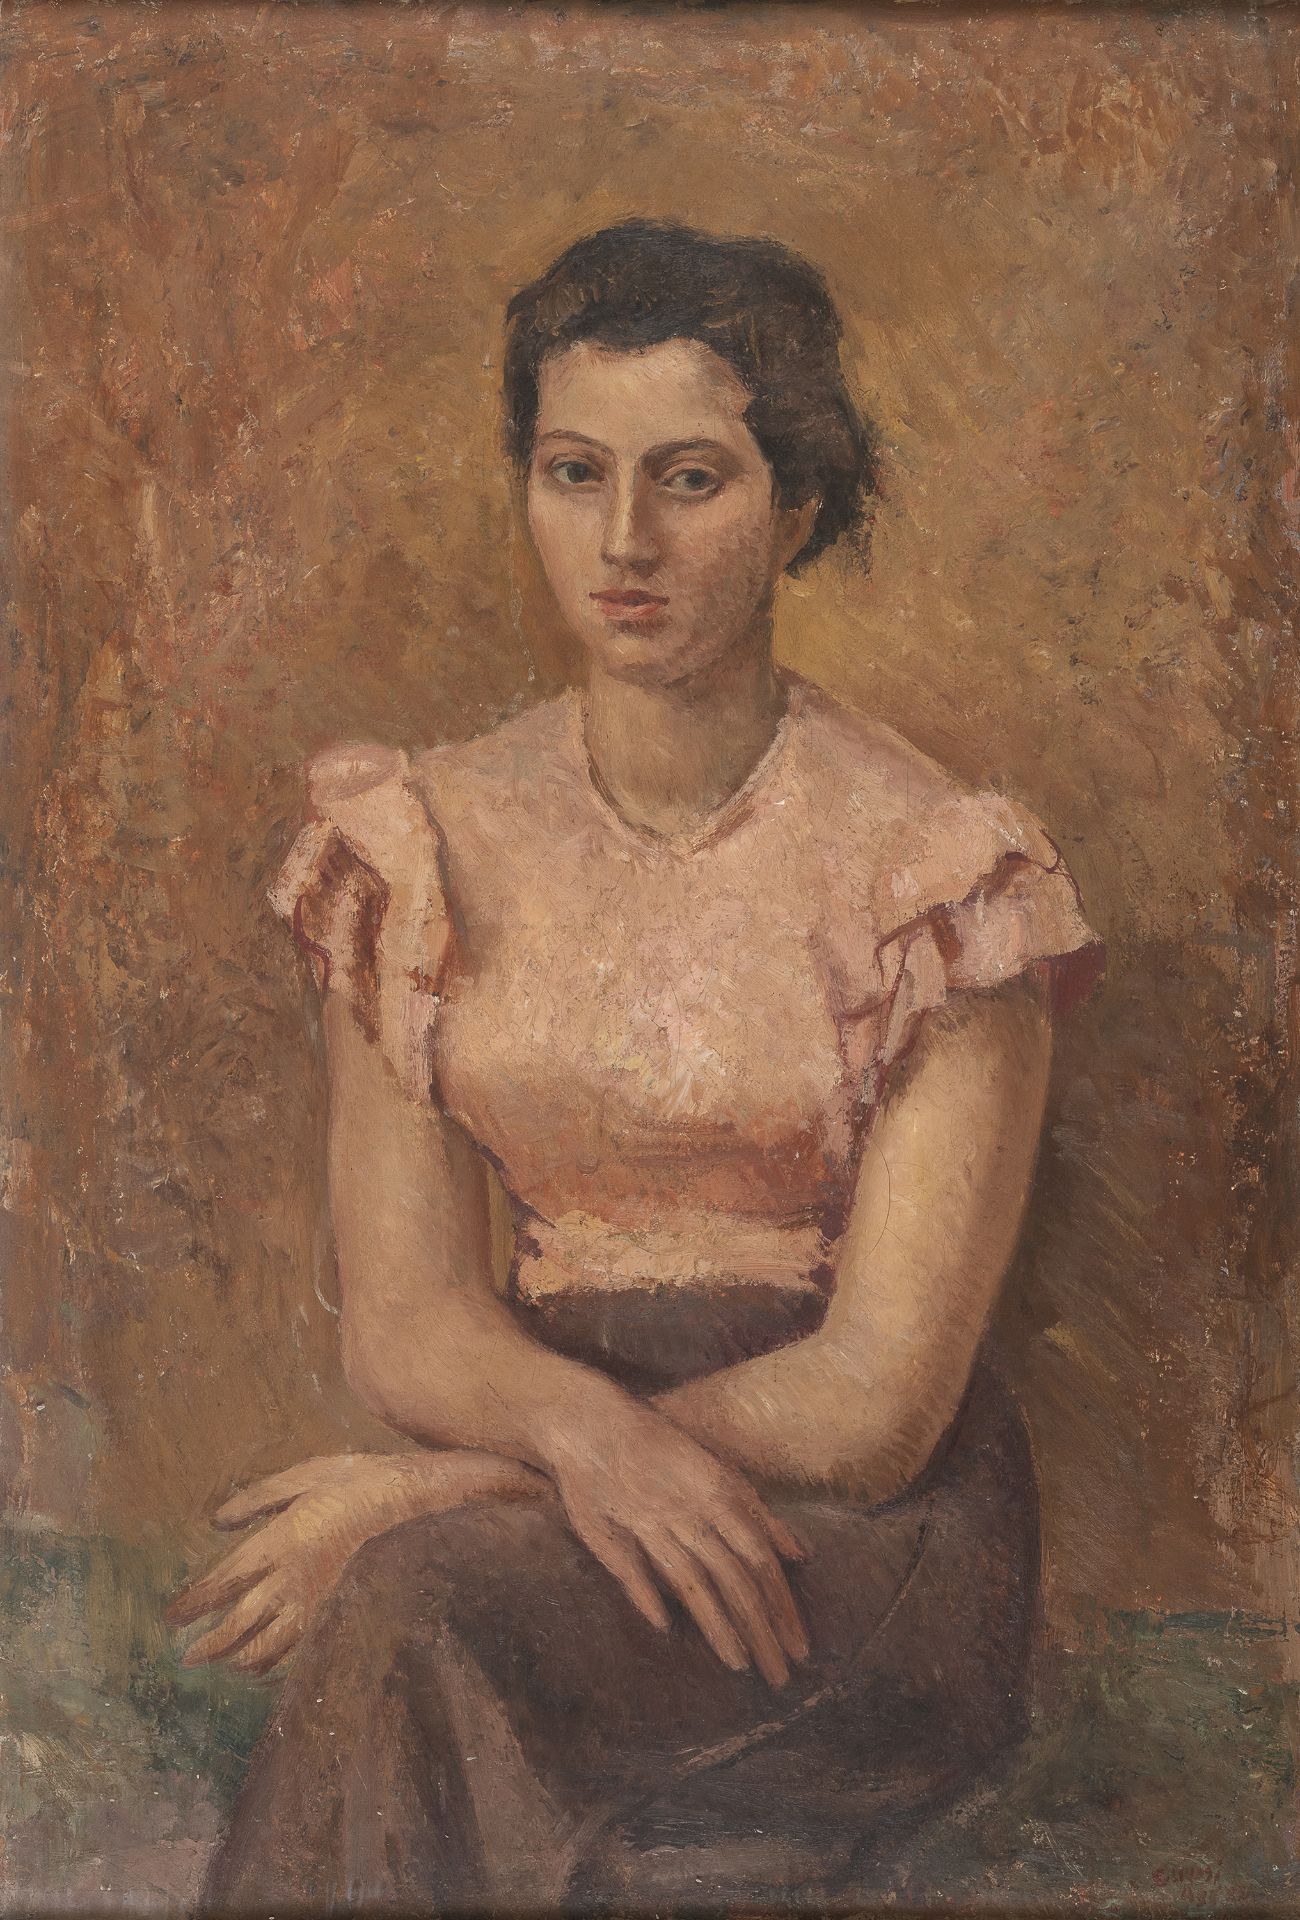 OIL PAINTING OF A SITTING WOMAN BY FRANCO GIROSI 1936